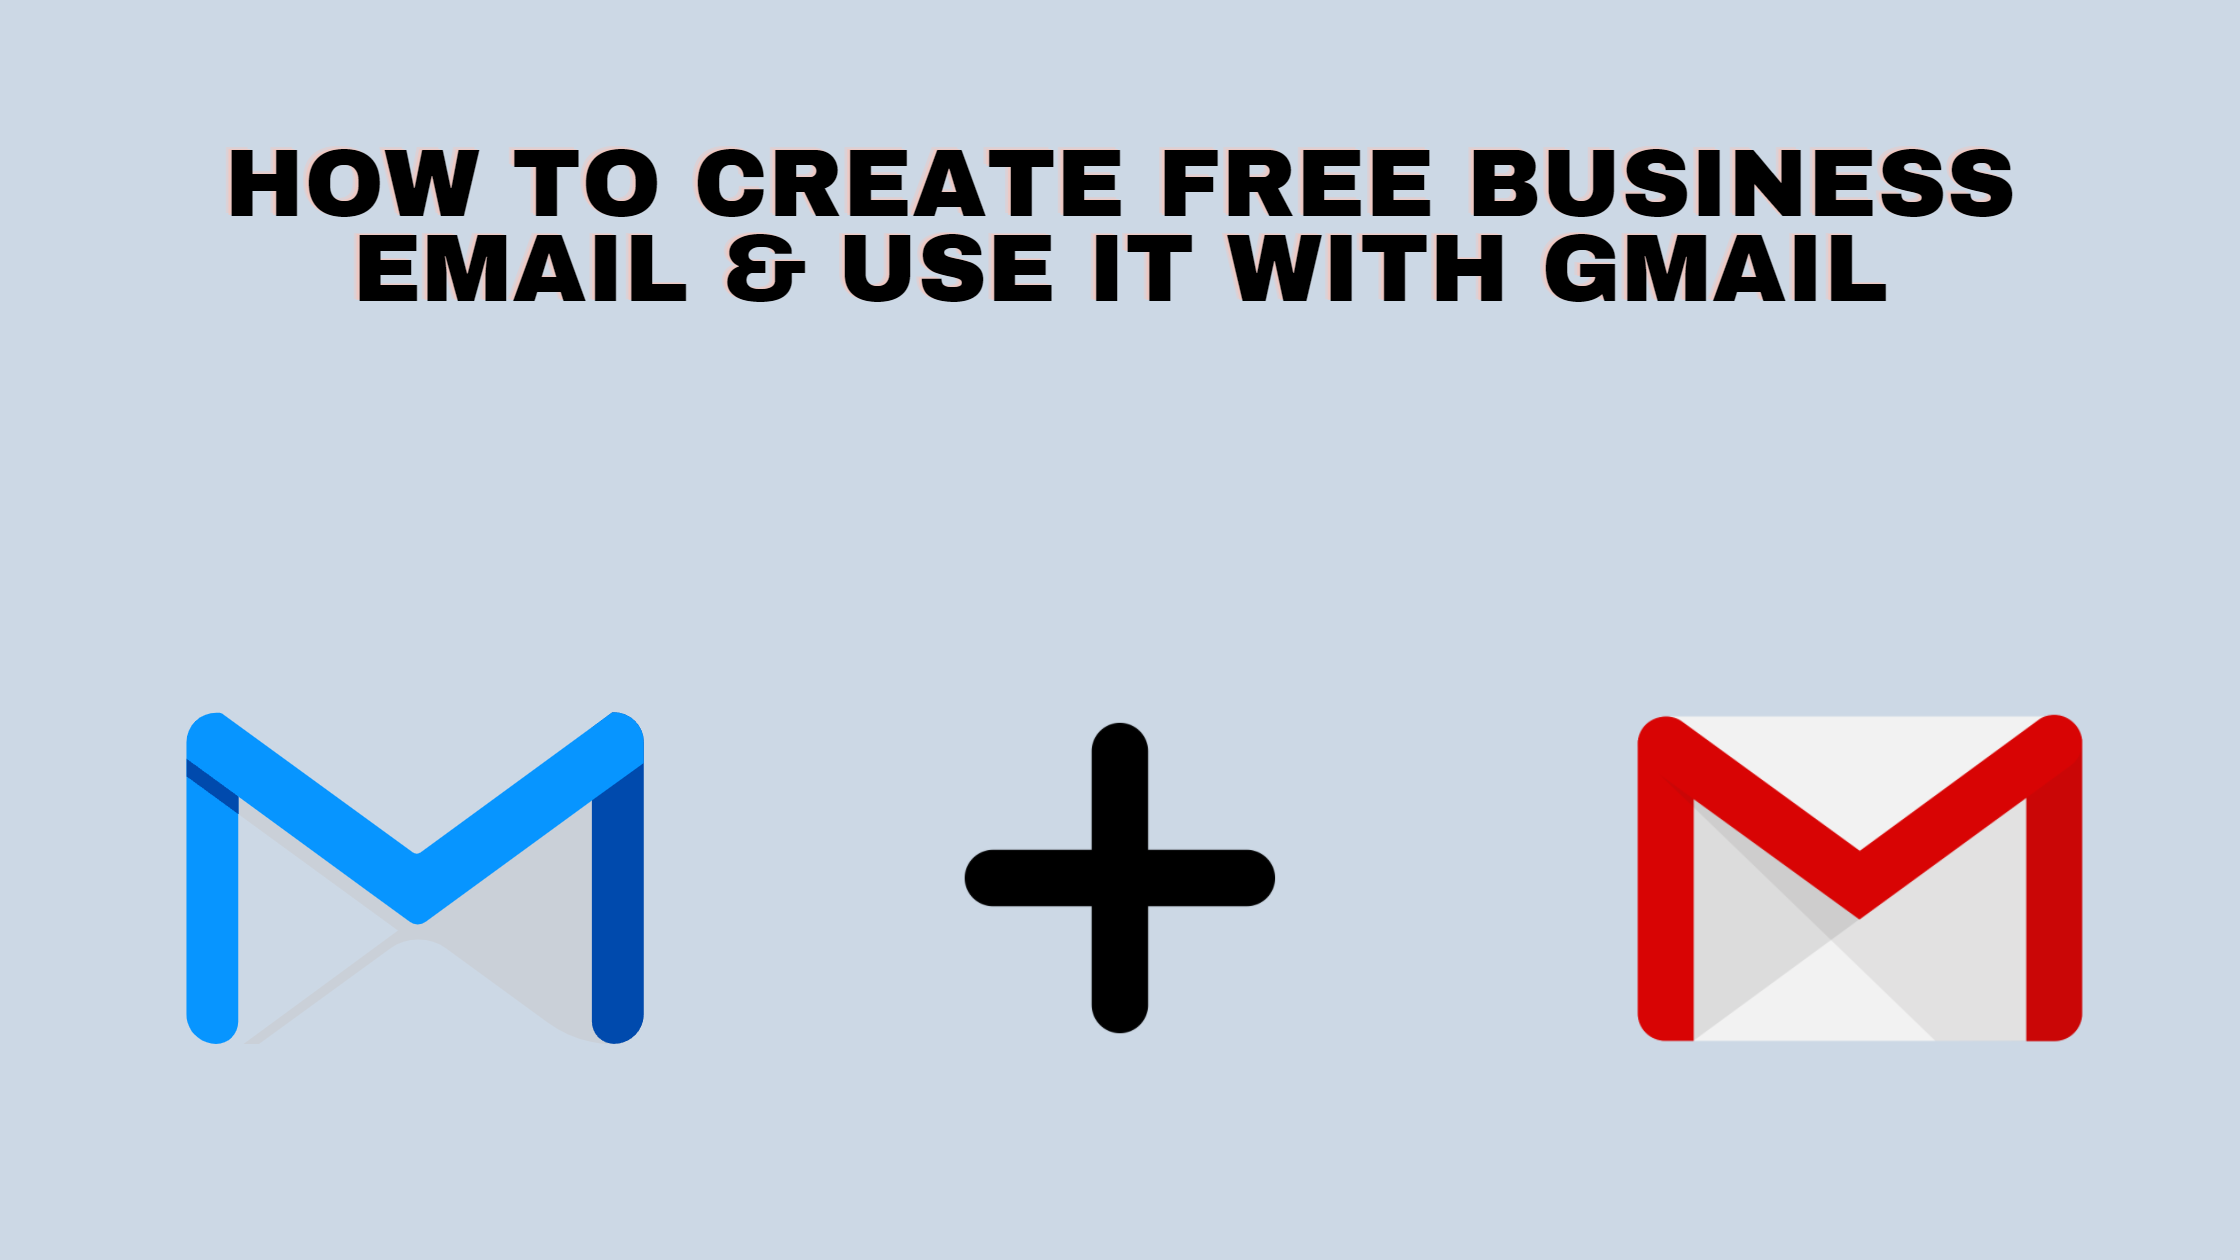 How to create FREE Business email & use it with Gmail.